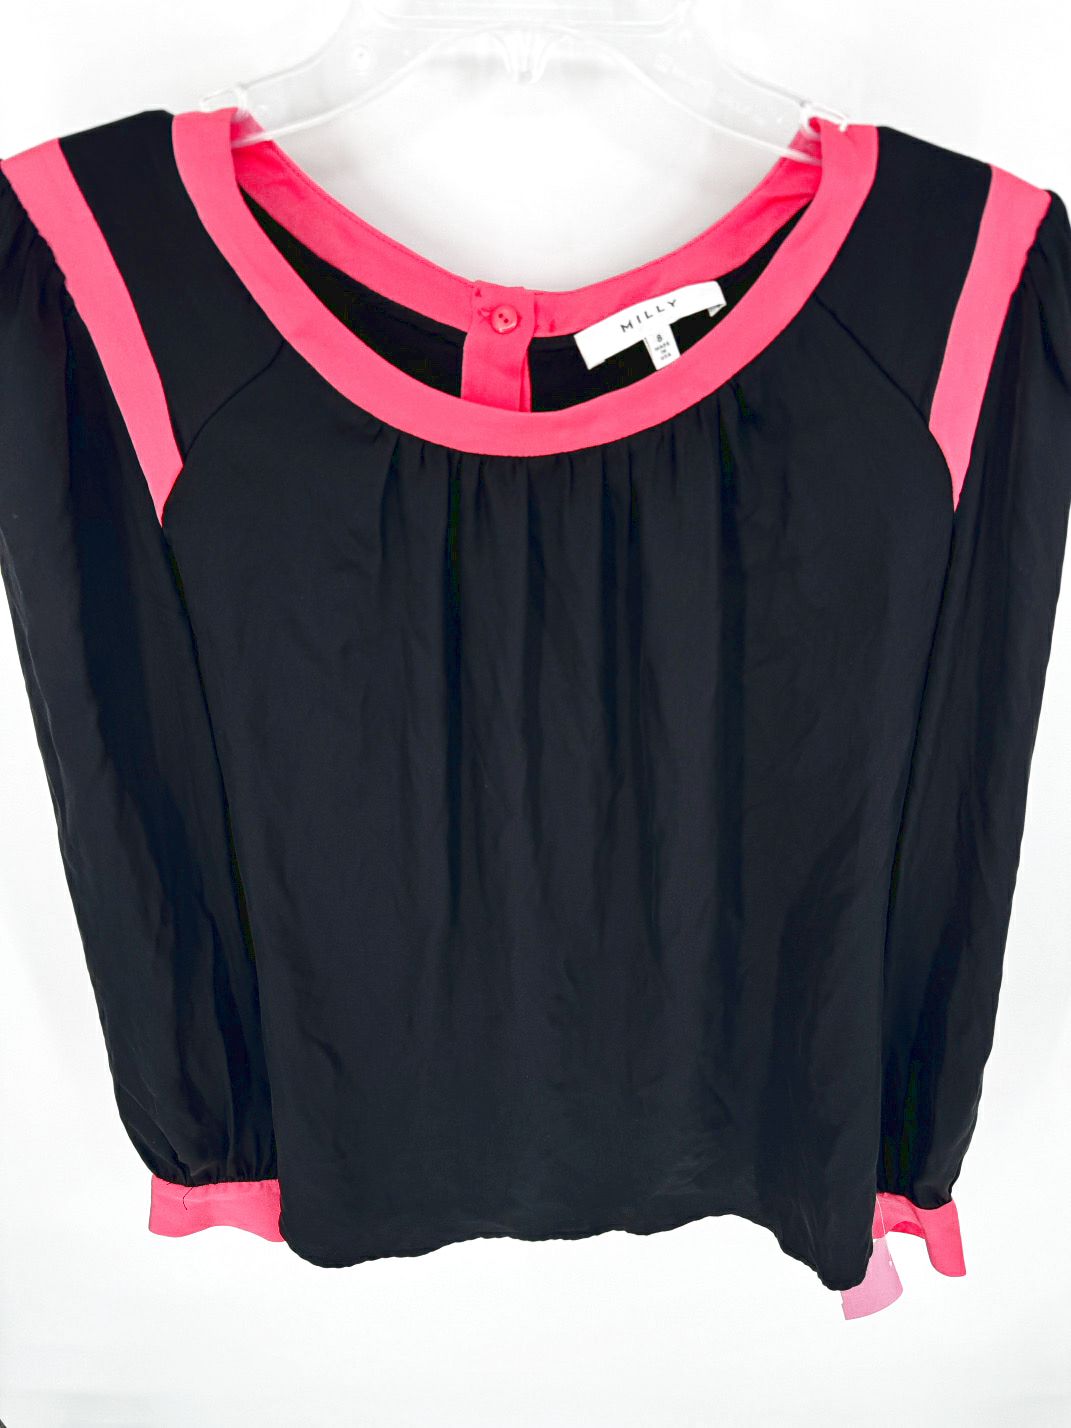 MILLY Size 8 Black & Pink Silk Bow Back Blouse